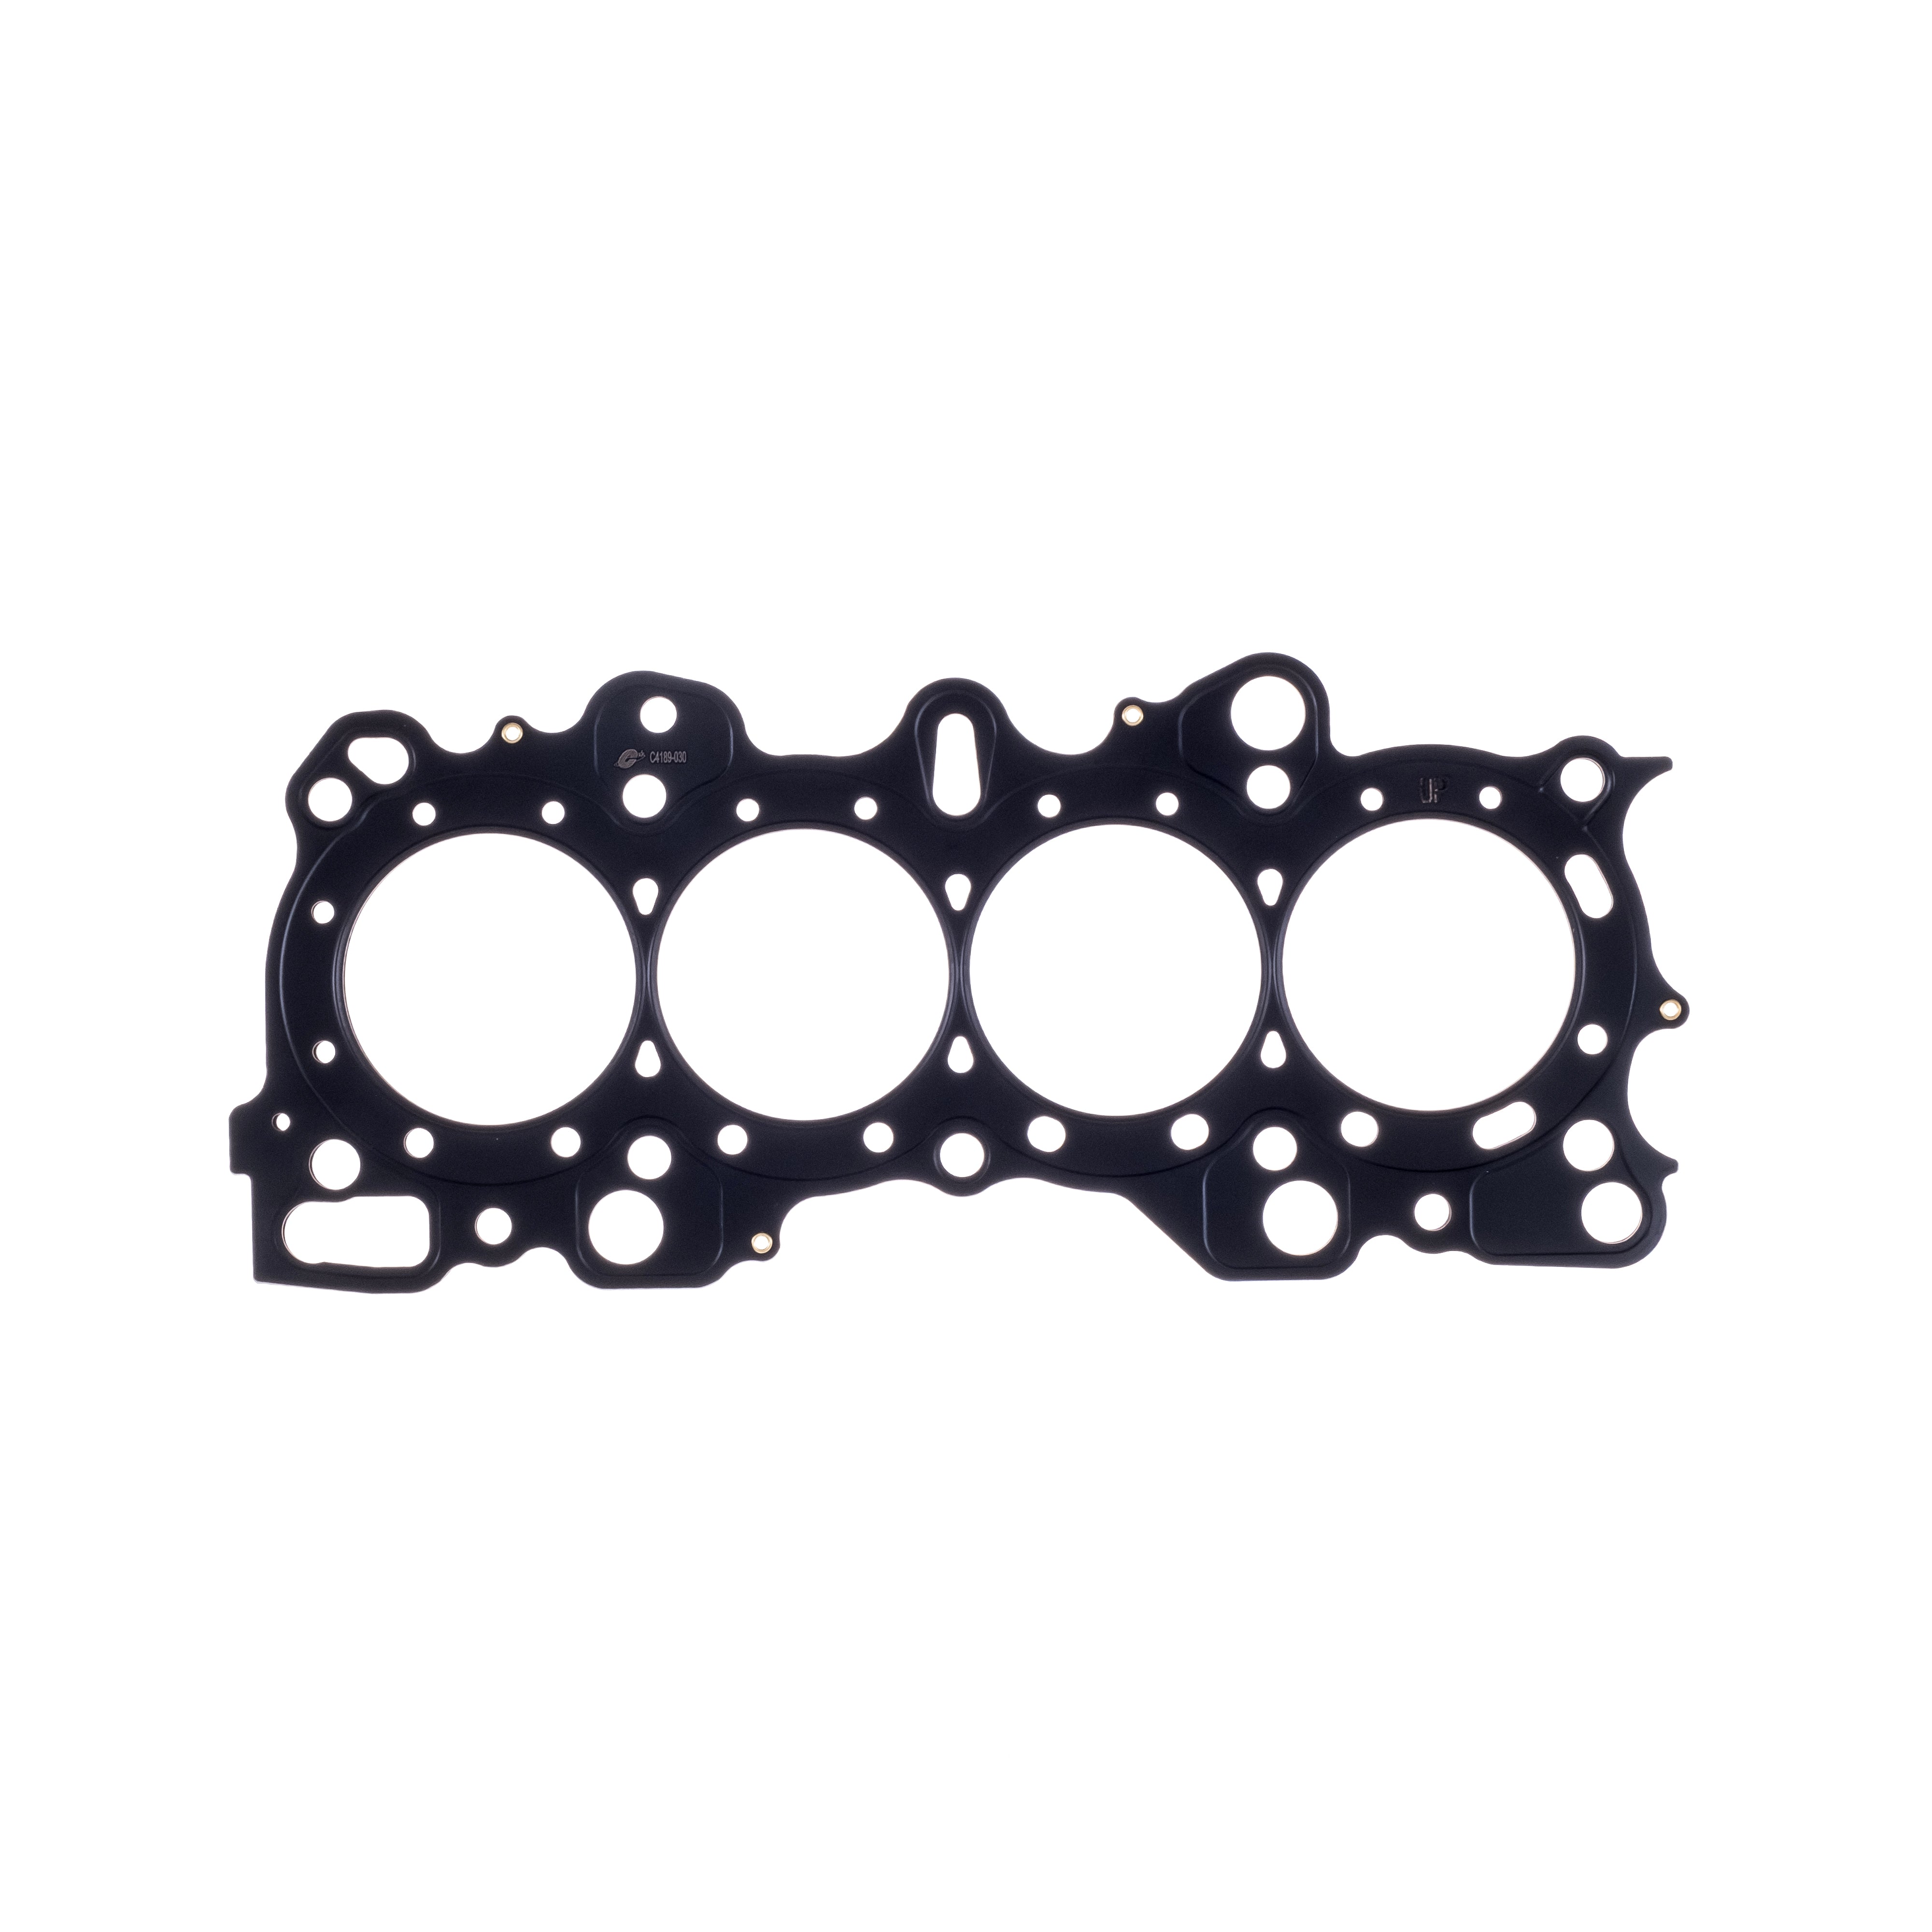 Cometic Honda B16A2/B16A3/B17A1/B18C1/B18C5 Head Gasket 1.1mm Thick (83mm) - C4189-045